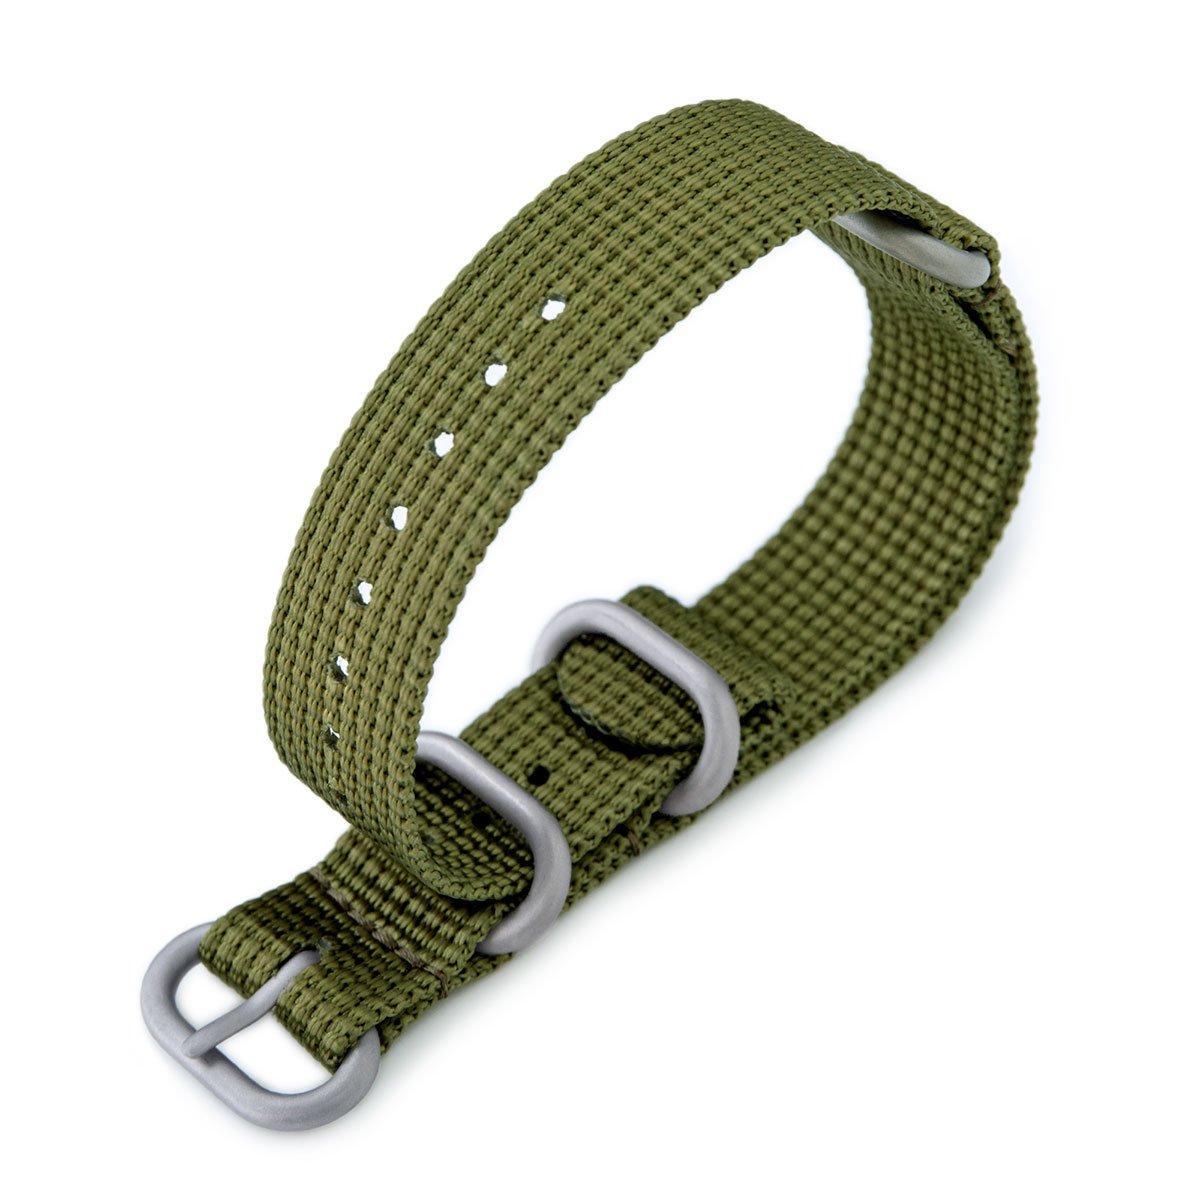 MiLTAT 18mm 3 Rings Zulu military watch strap 3D woven nylon armband Olive Green Brushed Hardware Strapcode Watch Bands